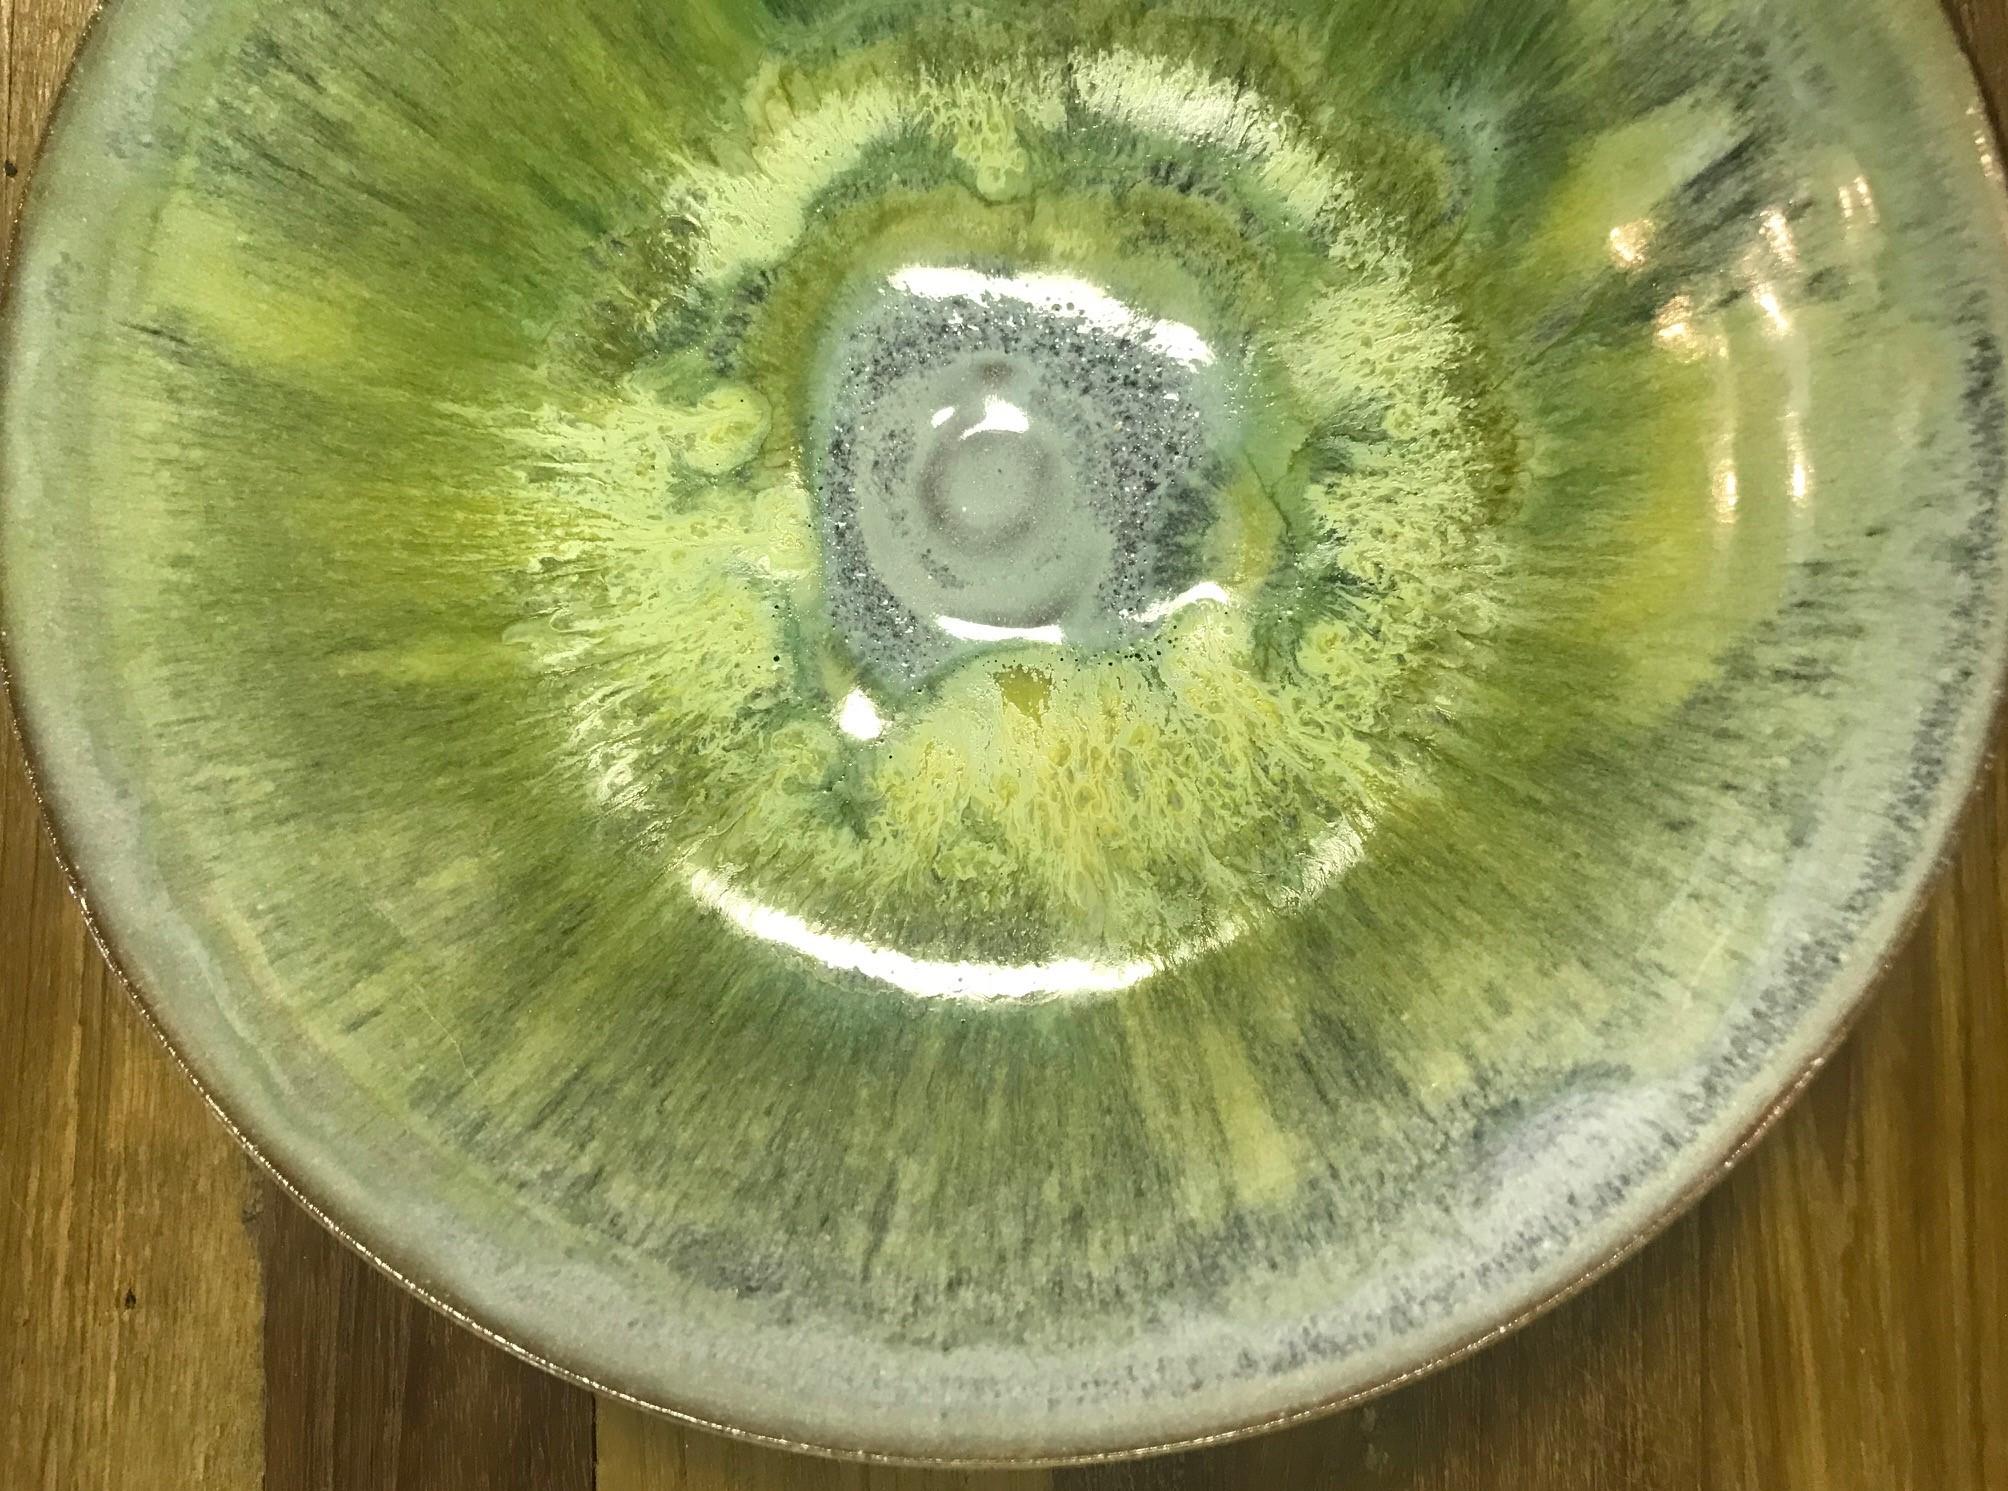 A wonderfully layered and glazed bowl by famed American ceramist Beatrice Wood. Beautifully textured. The bowl glows in the light. We have not seen another quite like it.

Signed by Wood on underside.

Would be an amazing addition to any